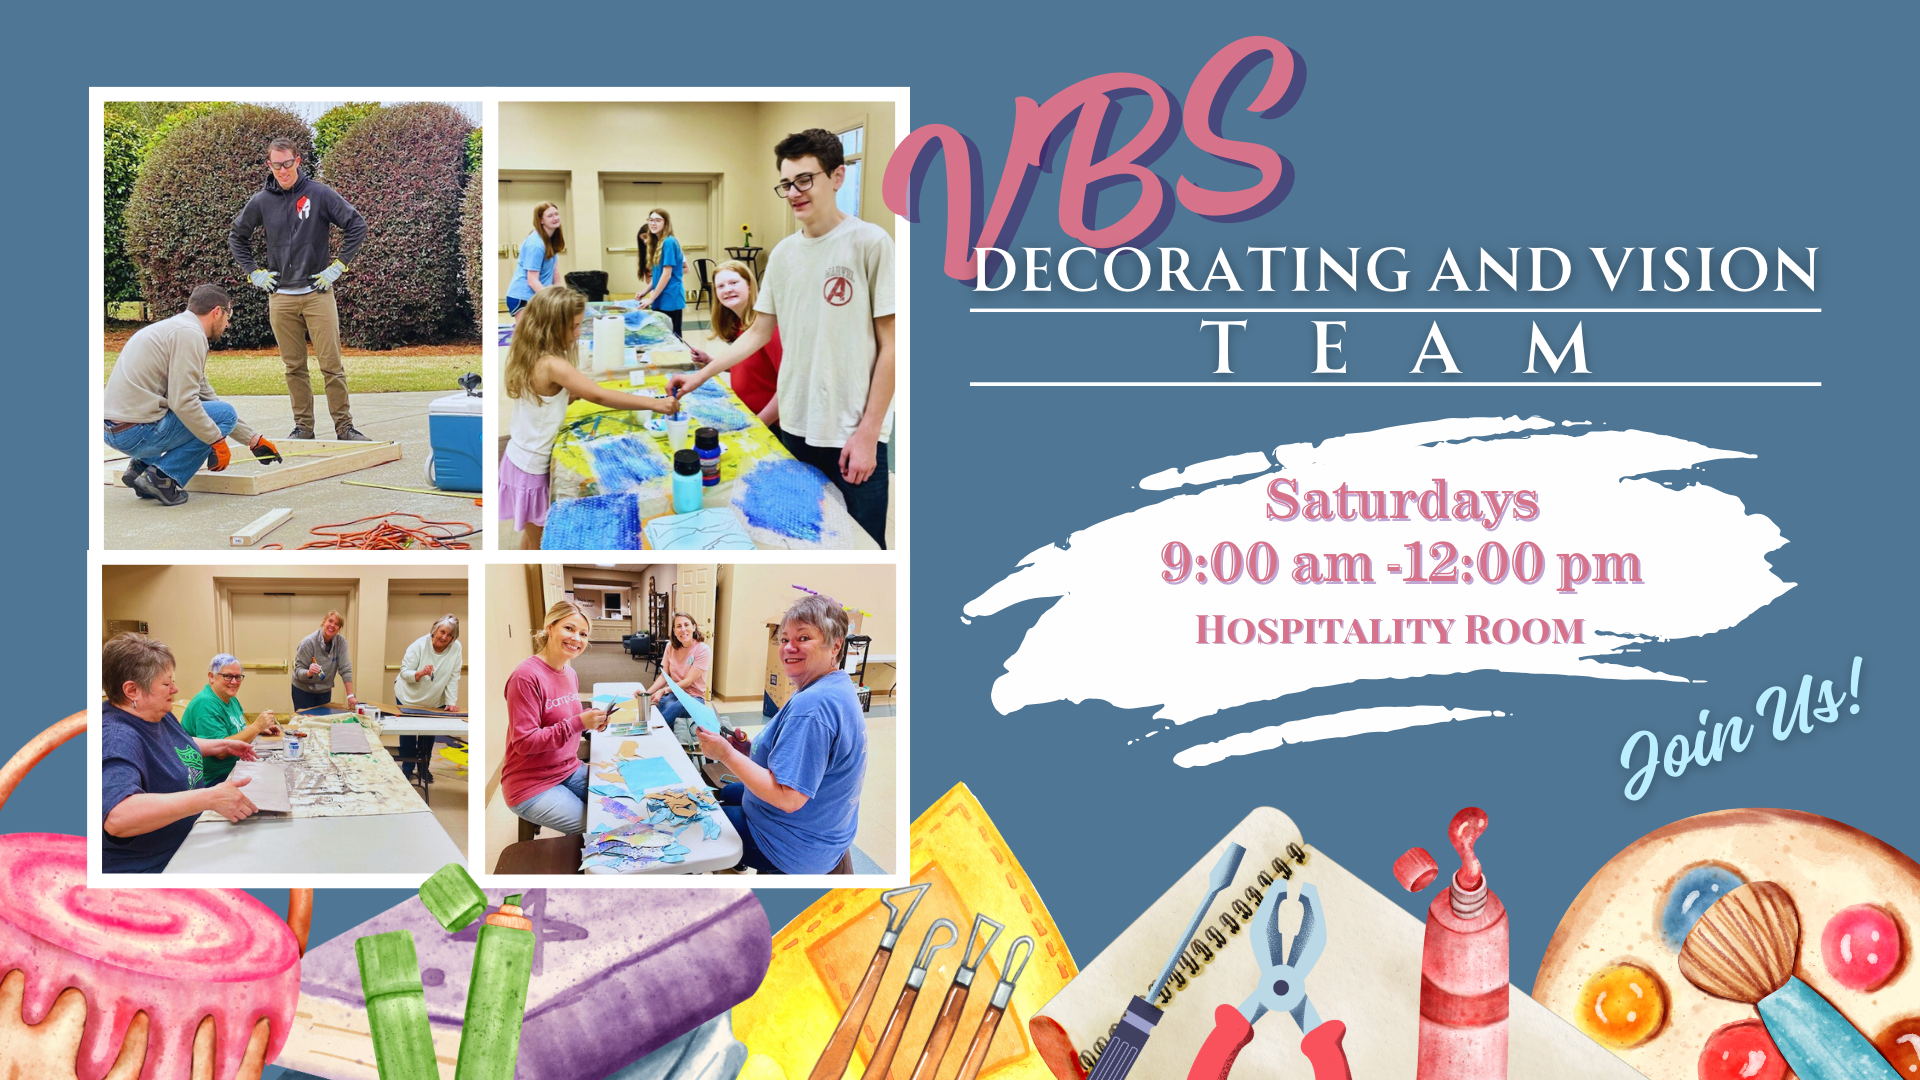 VBS Decorating and Vision Team